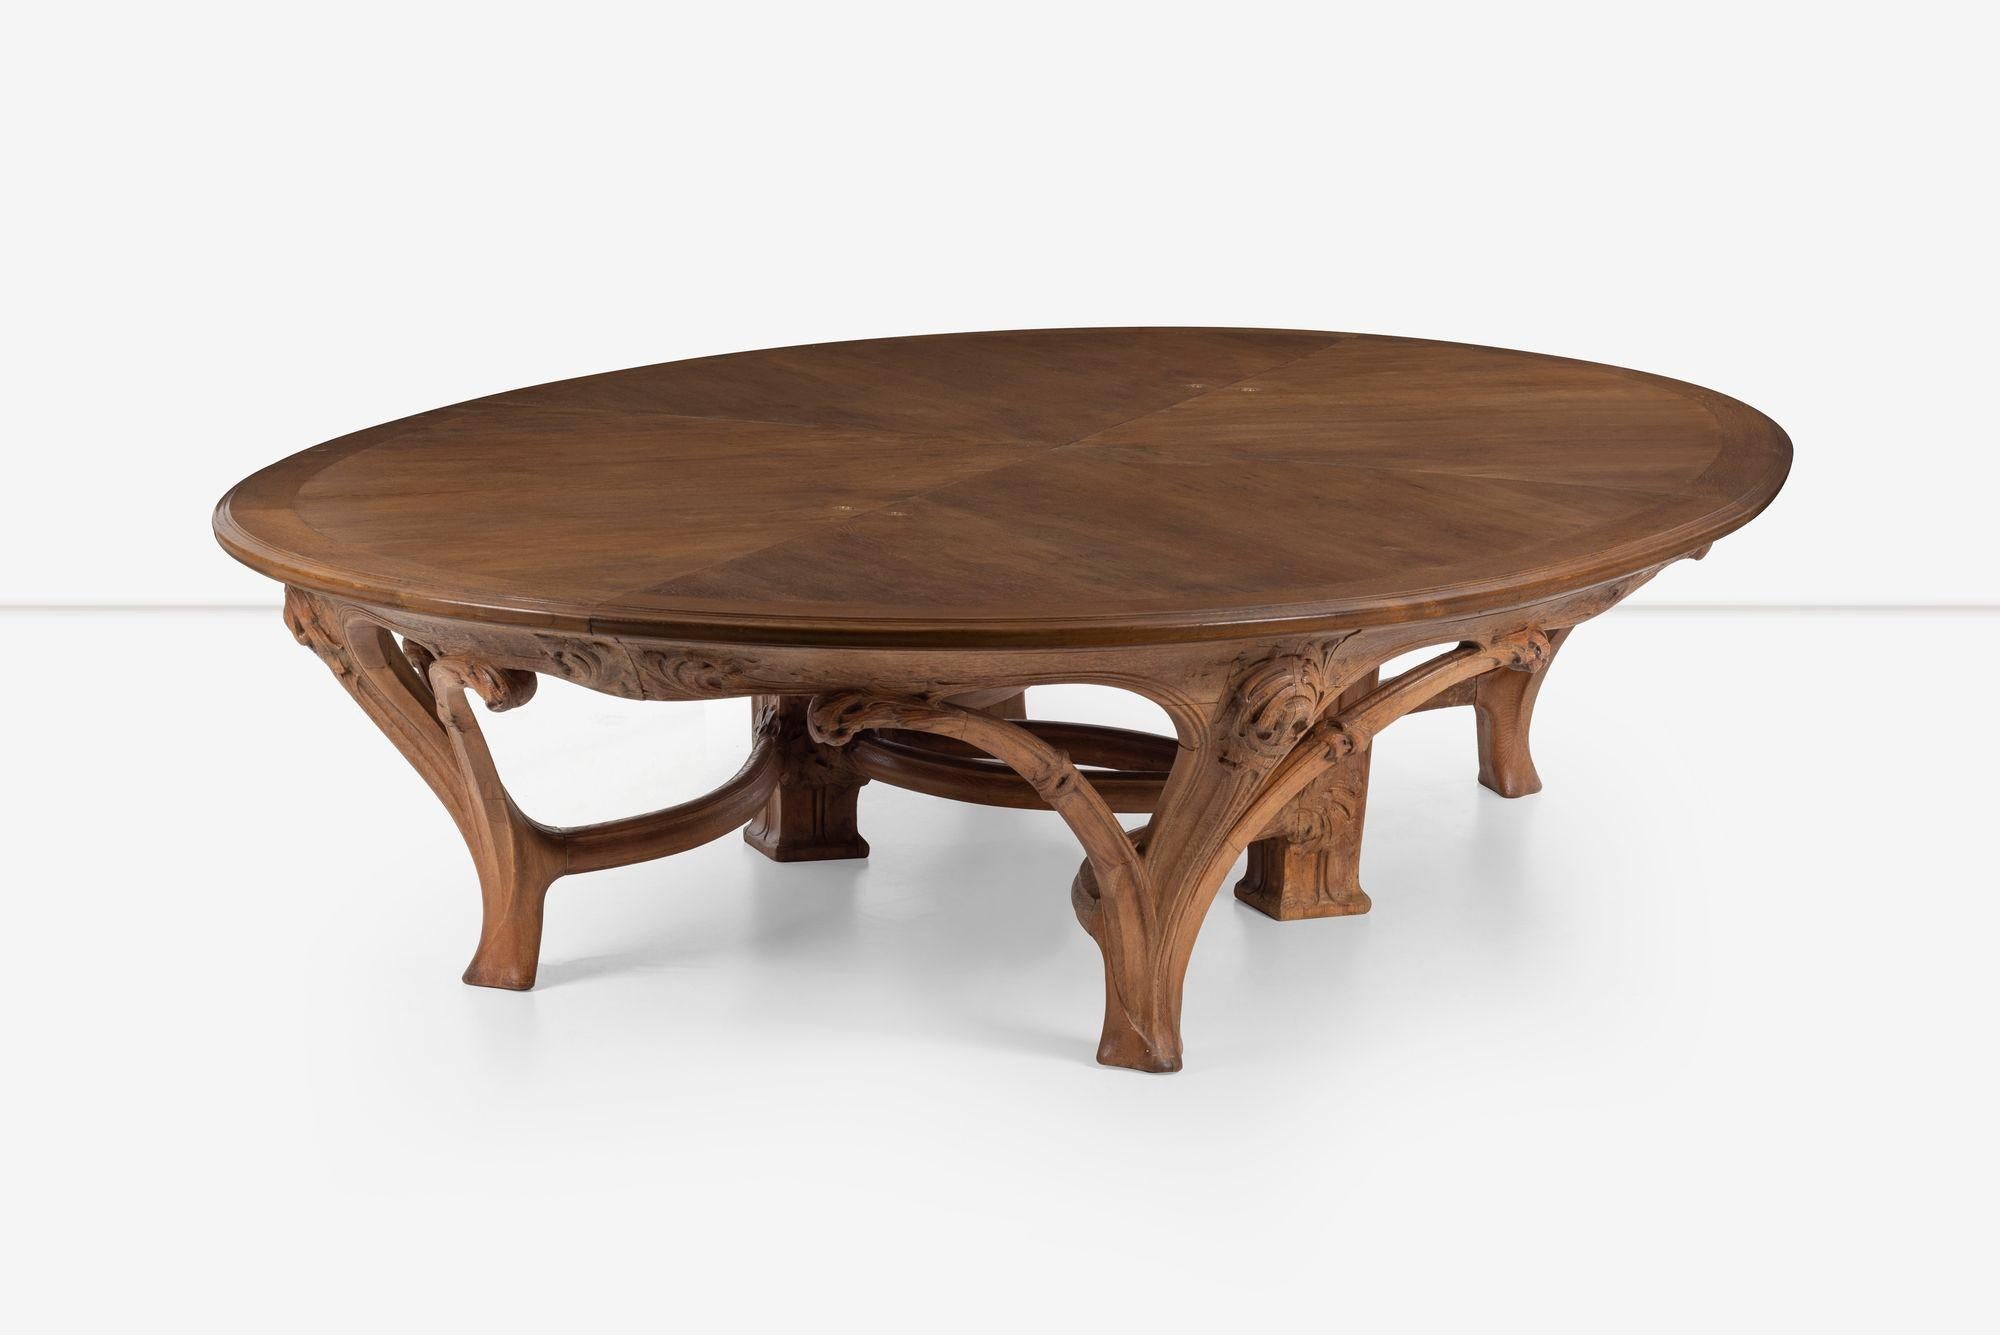 Monumental Art Nouveau Dining Table Attributed to Victor Horta from the Firehous In Good Condition For Sale In Chicago, IL